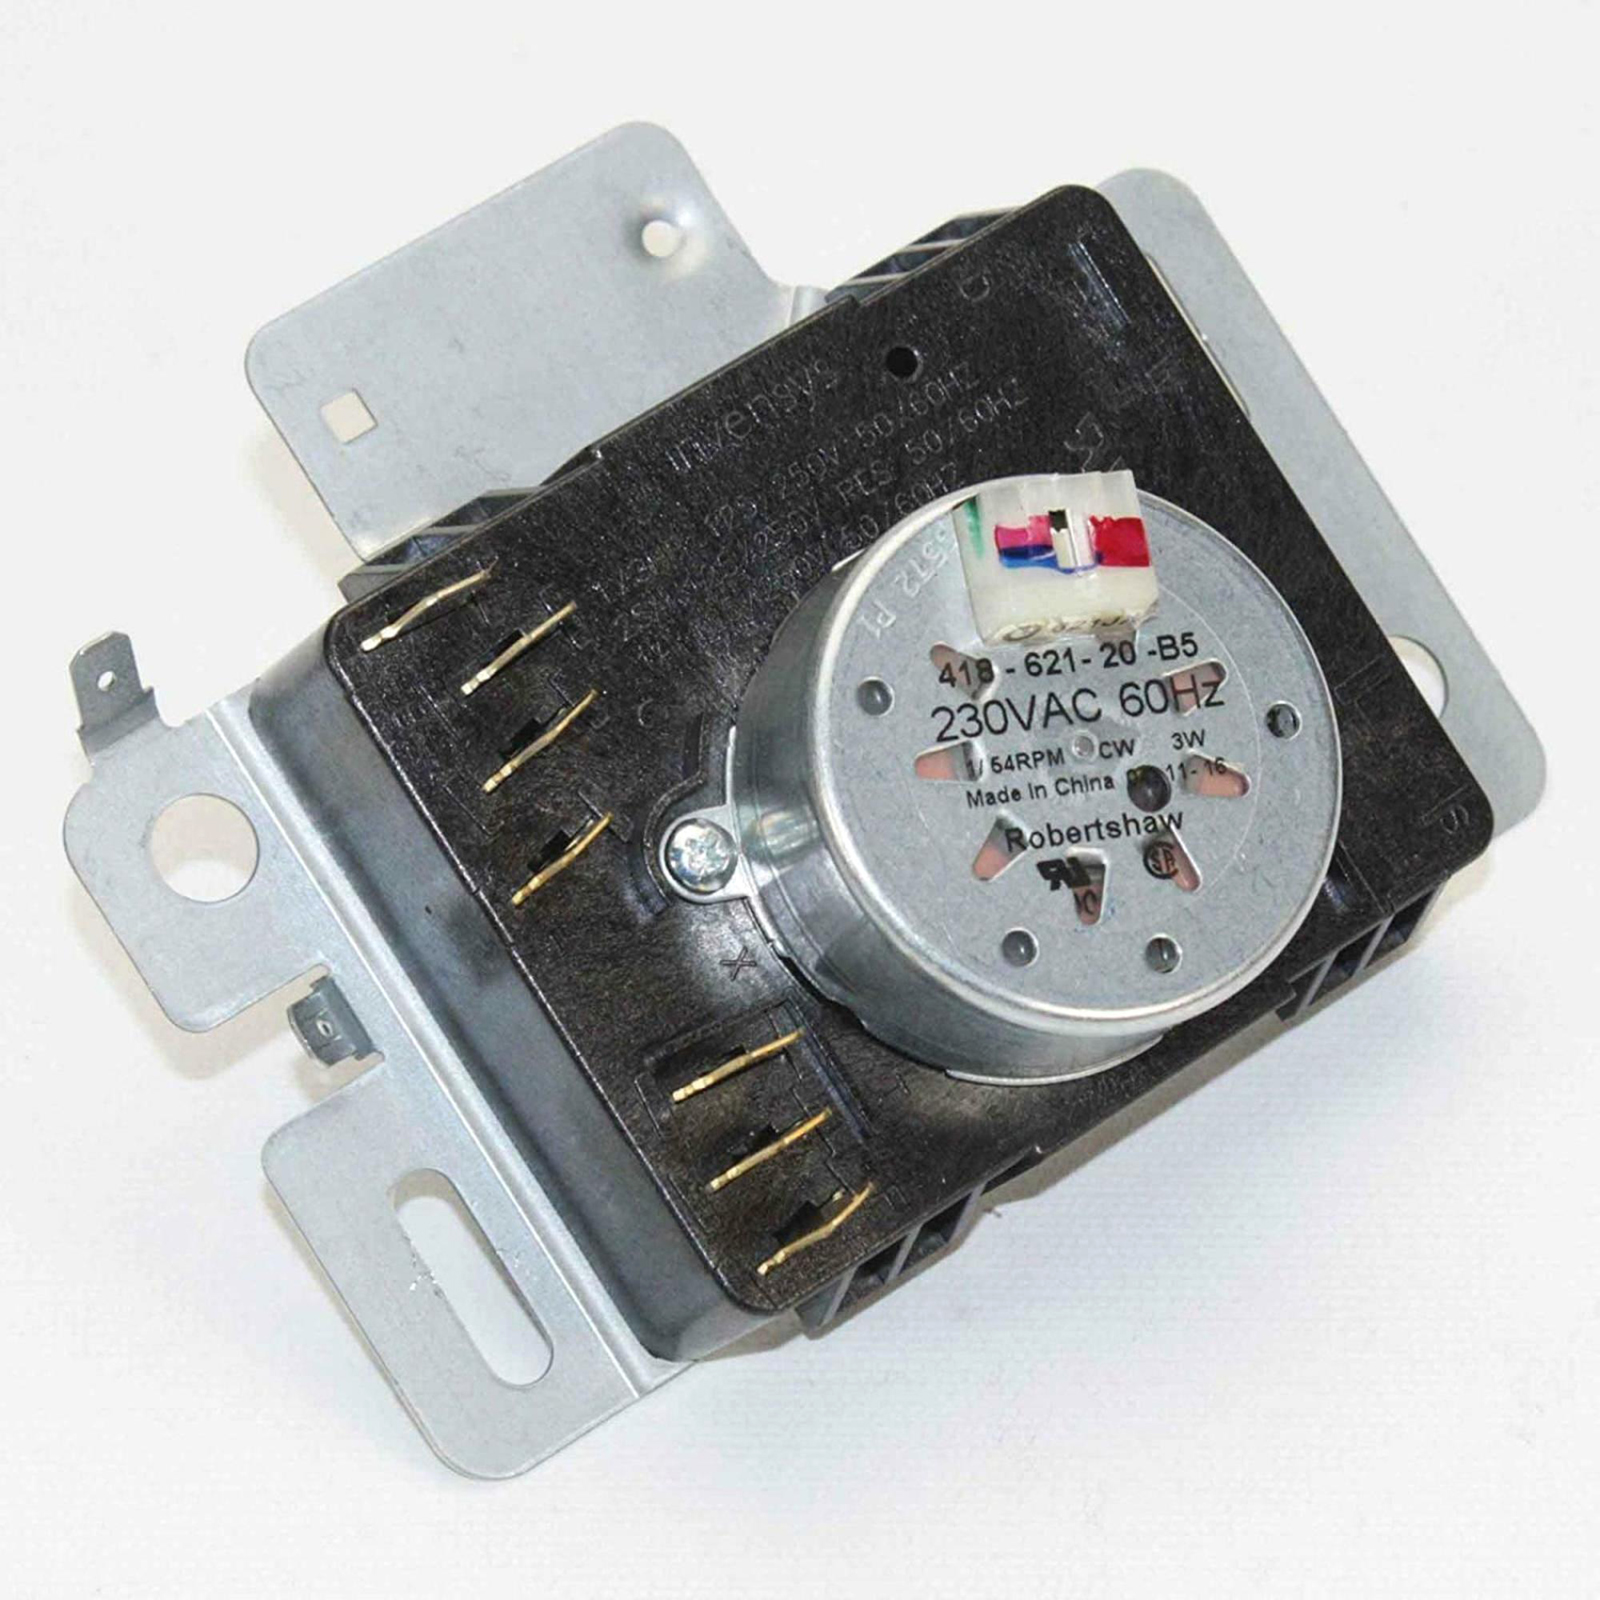 Read all description before purchasing!! W10185992 Dryer Timer Repair Service 